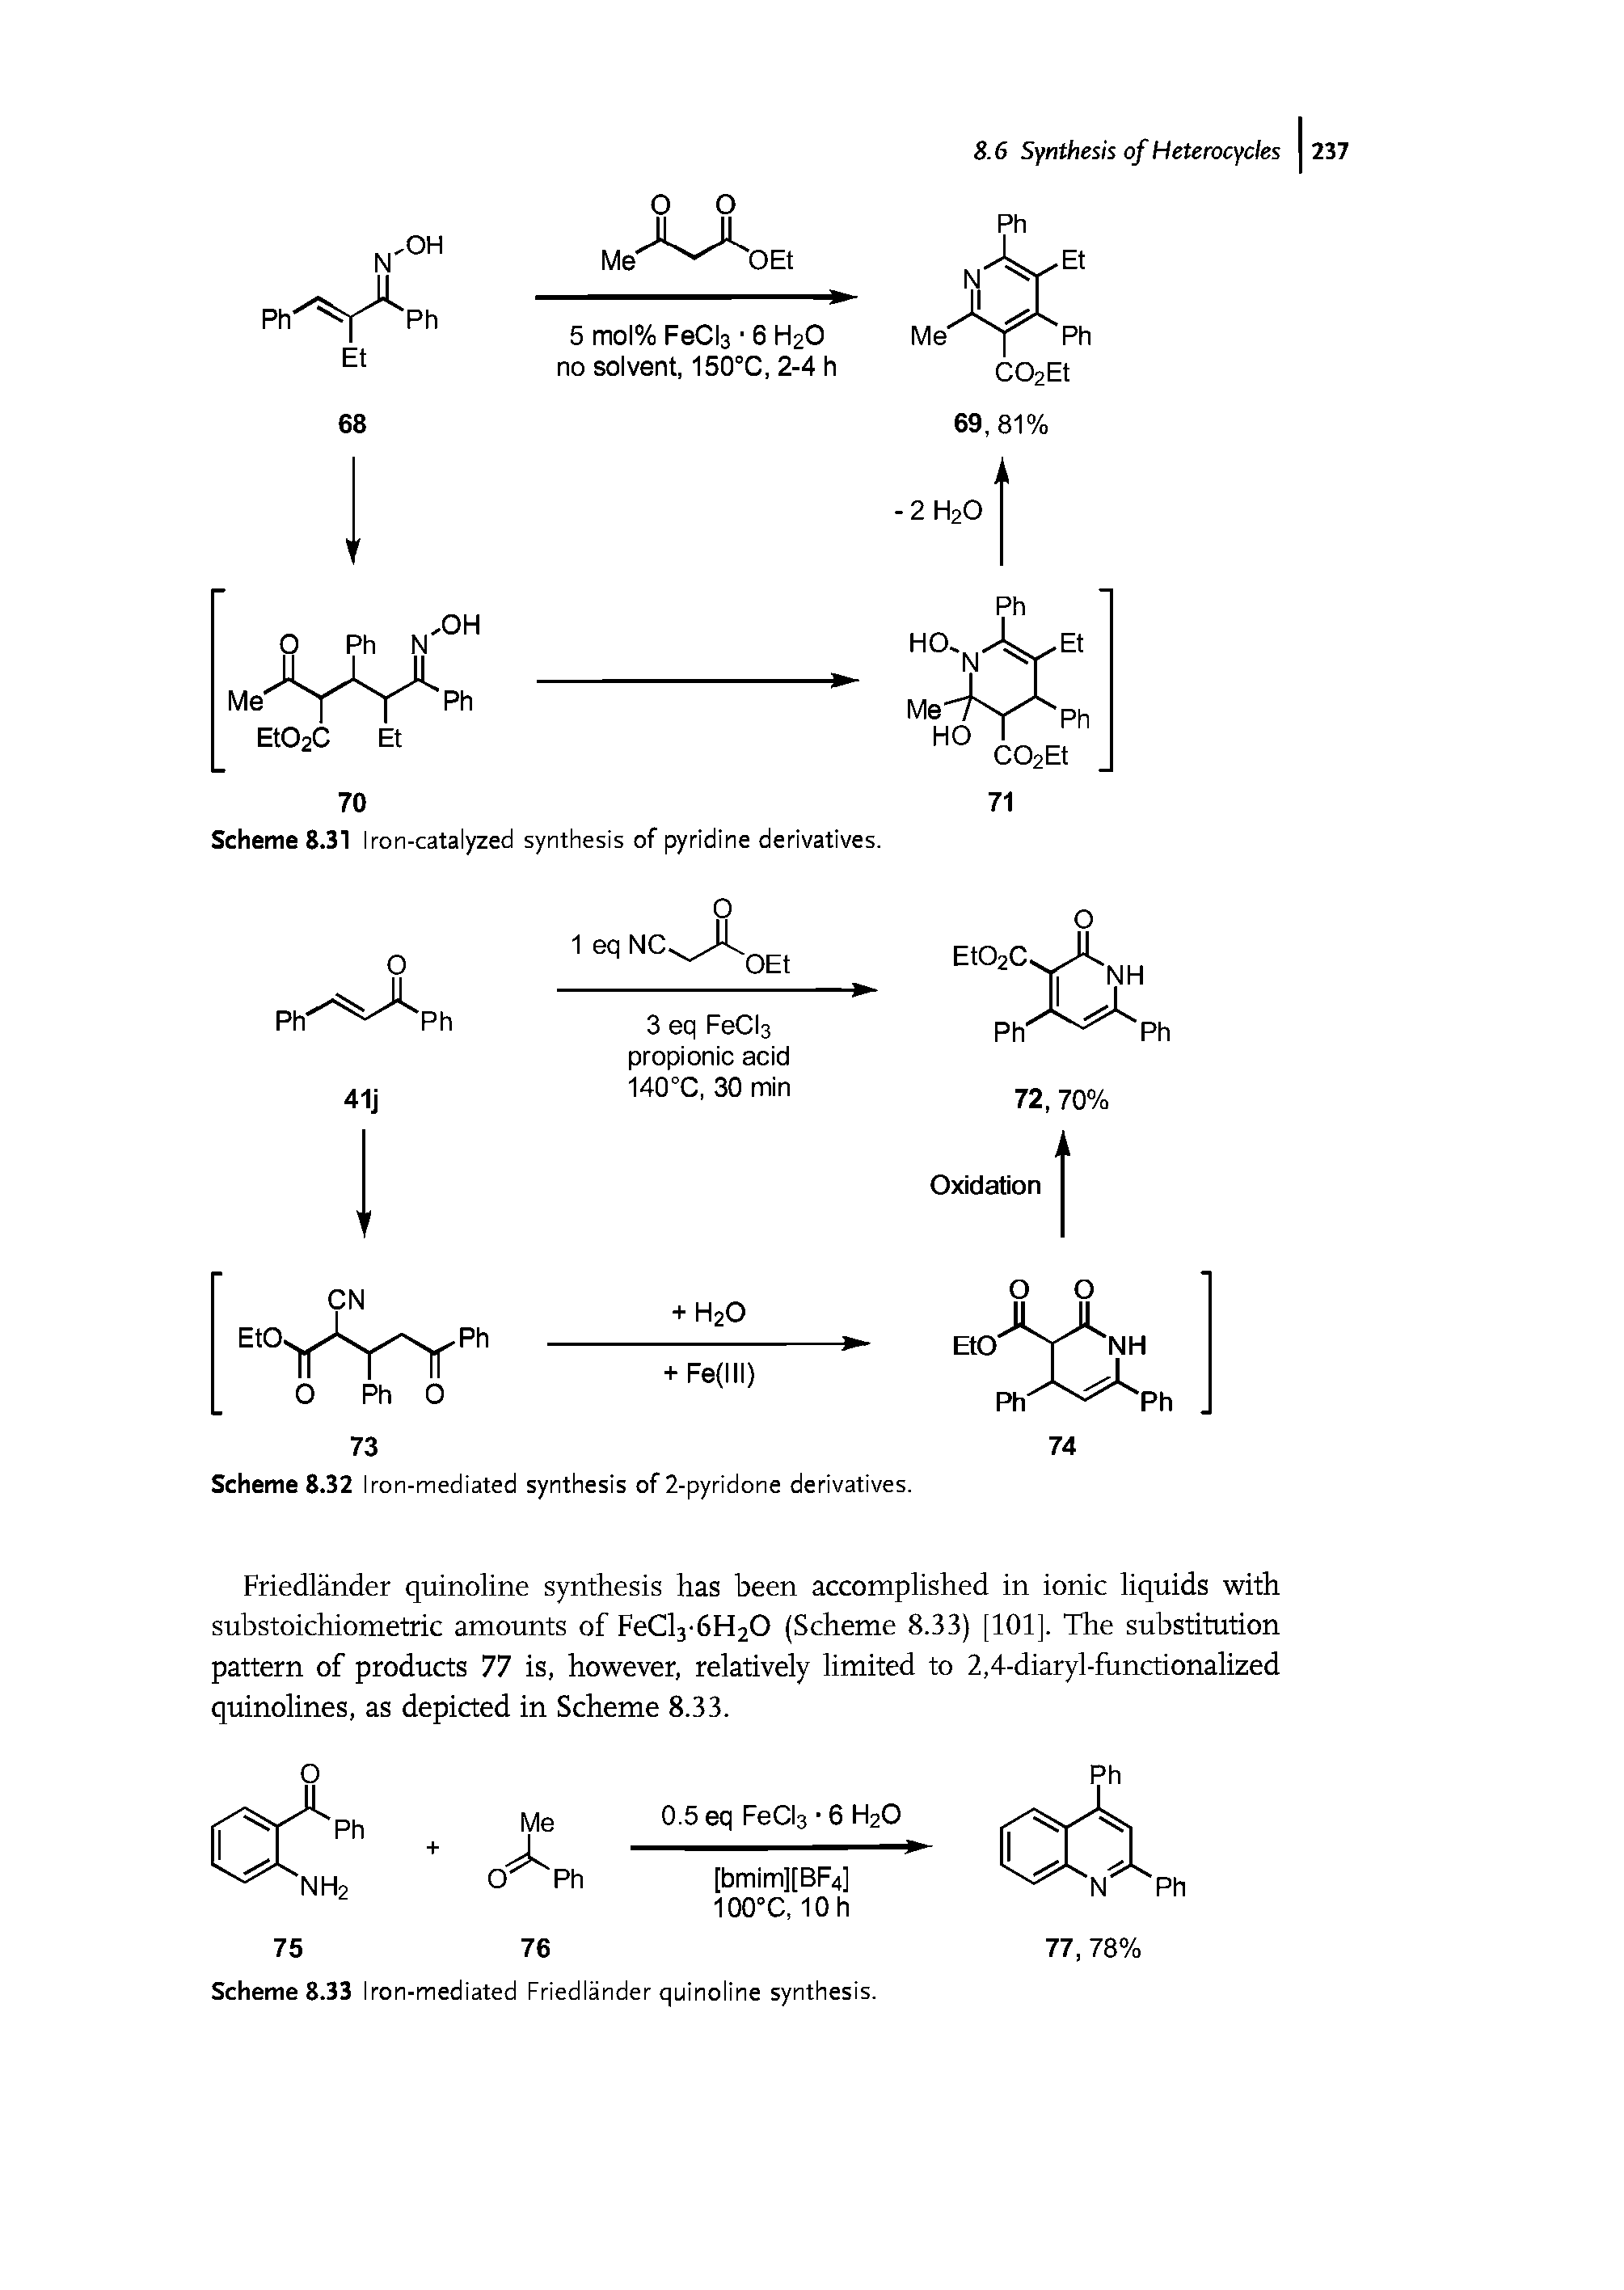 Scheme 8.32 Iron-mediated synthesis of 2-pyridone derivatives.